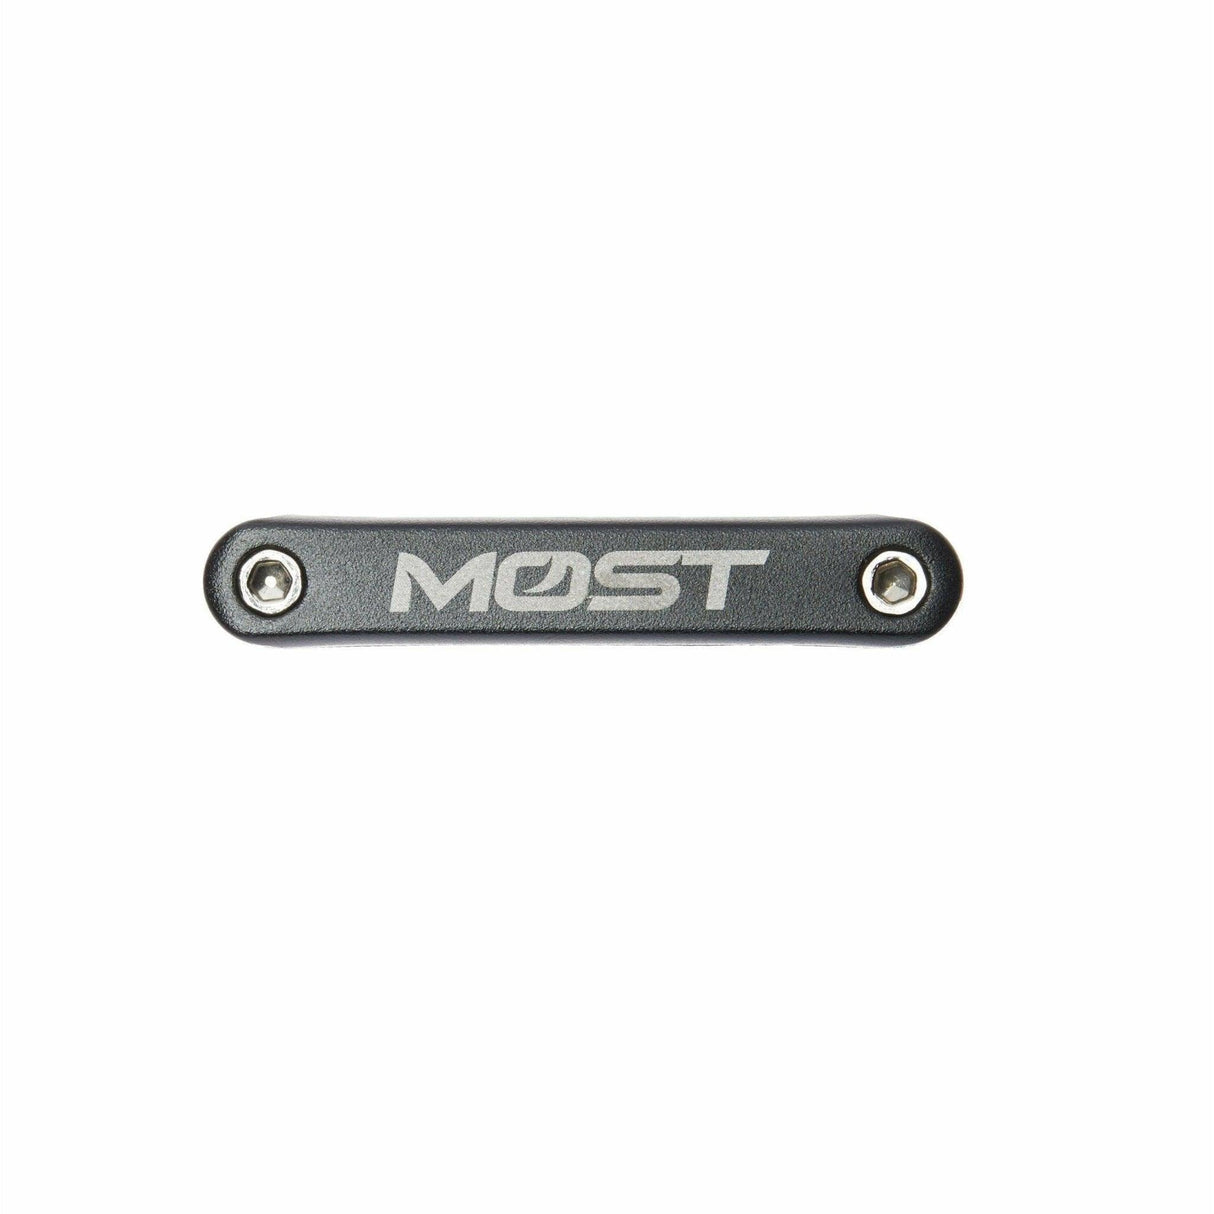 MOST Most Iron 6 Multitool | Strictly Bicycles 